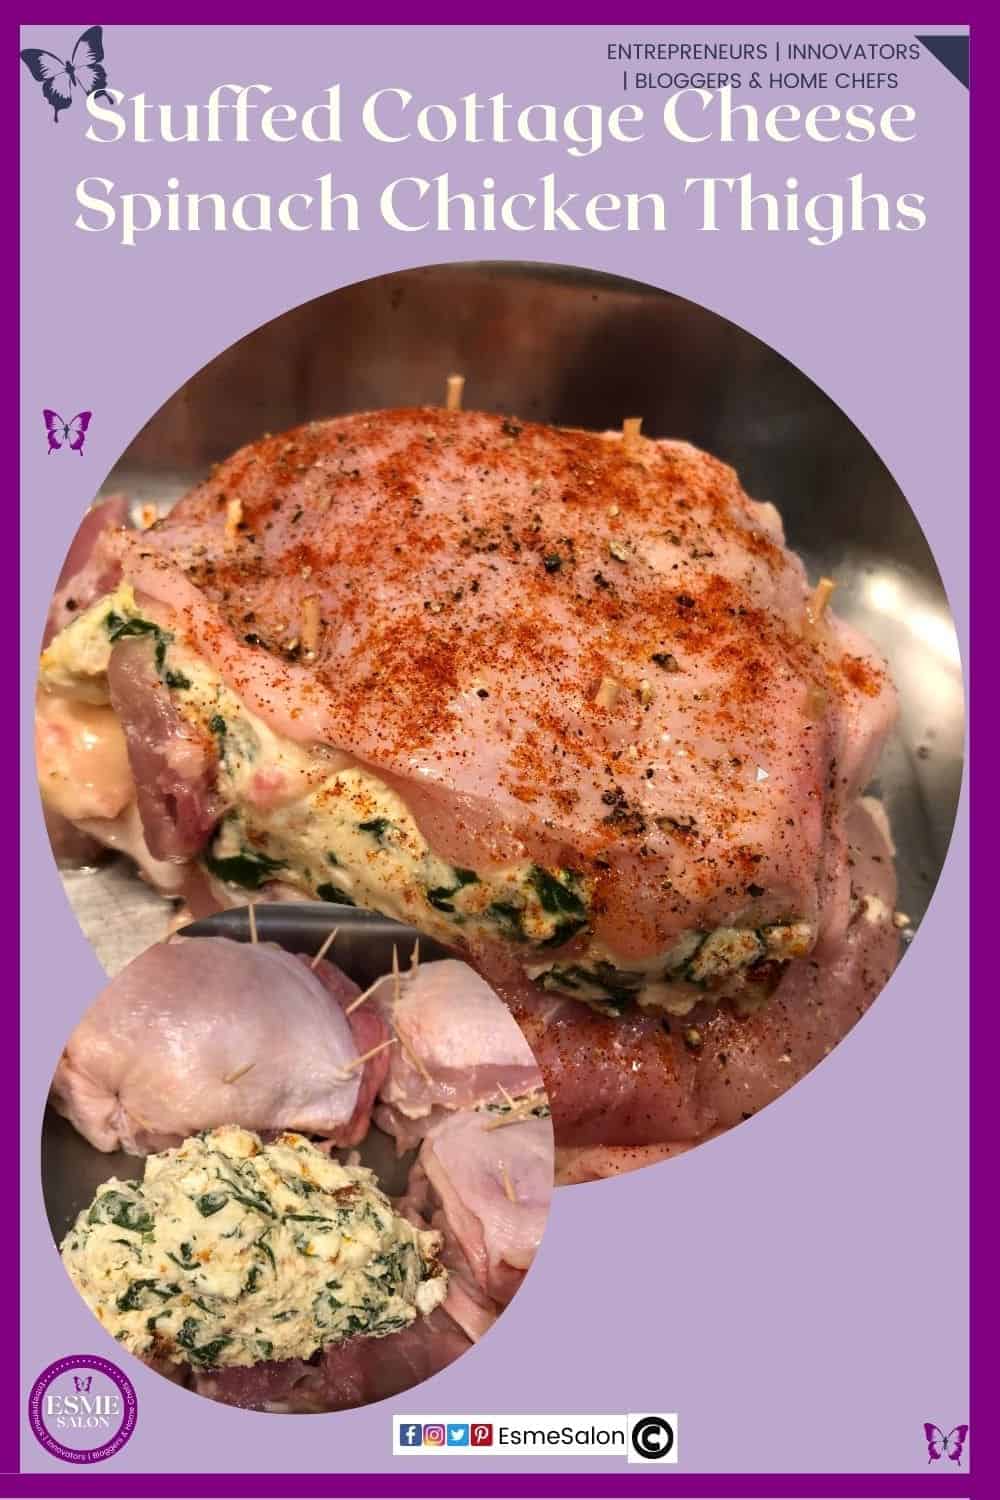 an image of Stuffed Cottage Cheese Spinach Chicken Thighs baked, spiced but still raw, and raw with cheese filling